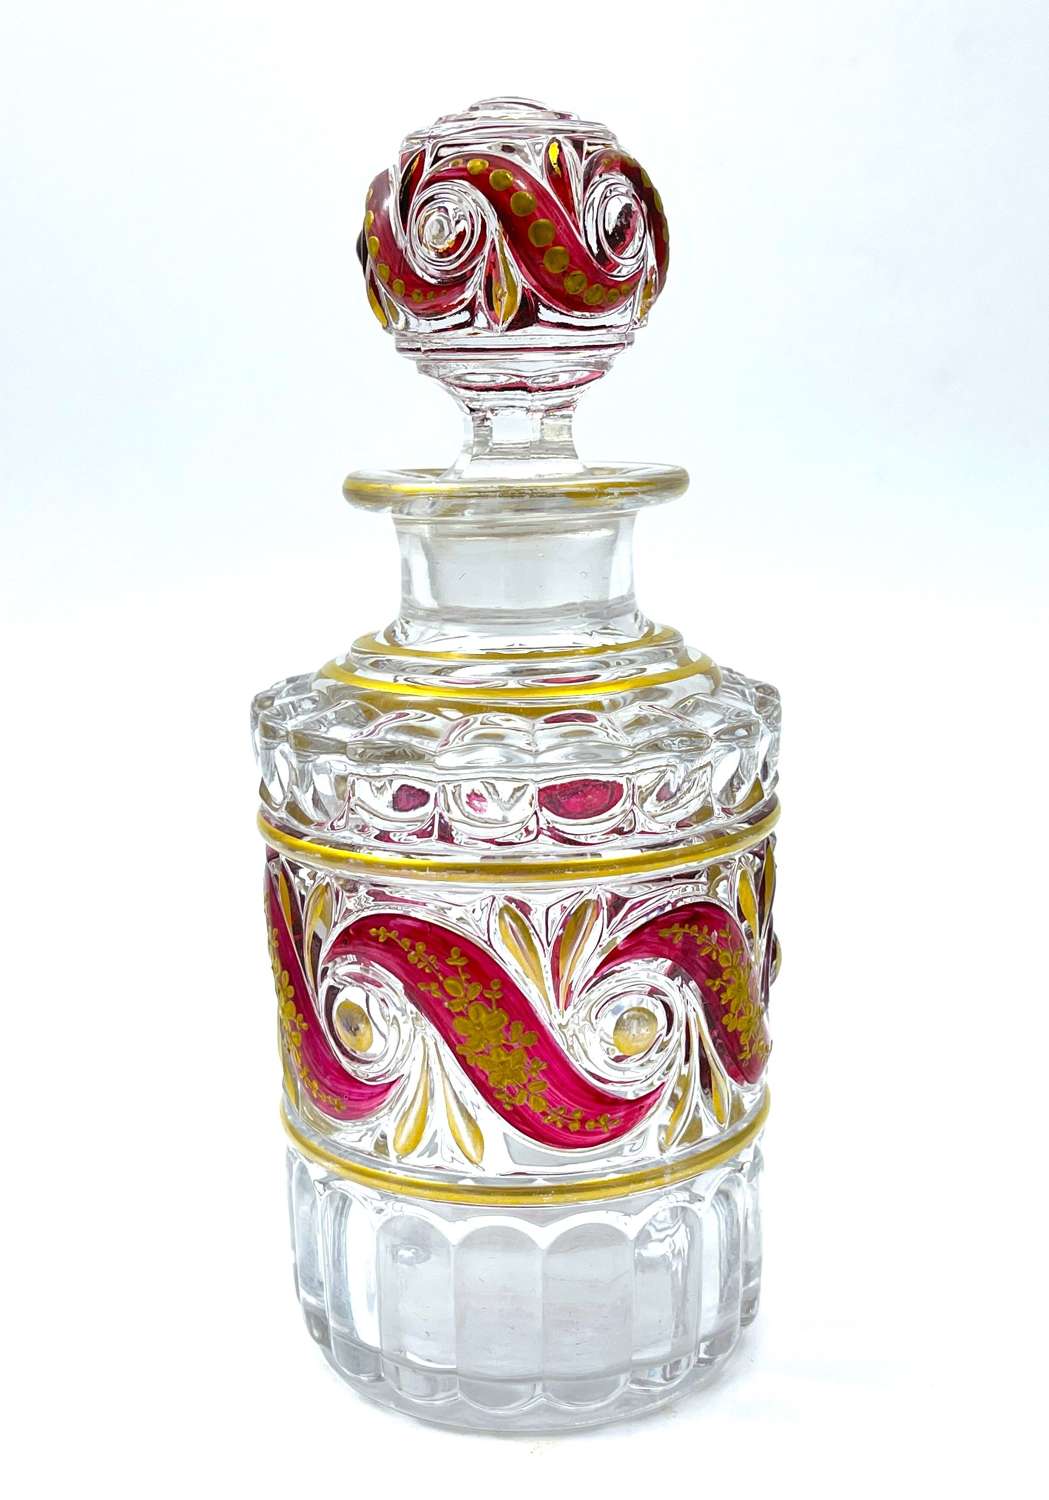 Unusual Antique Baccarat Crystal Glass Perfume Bottle and Stopper